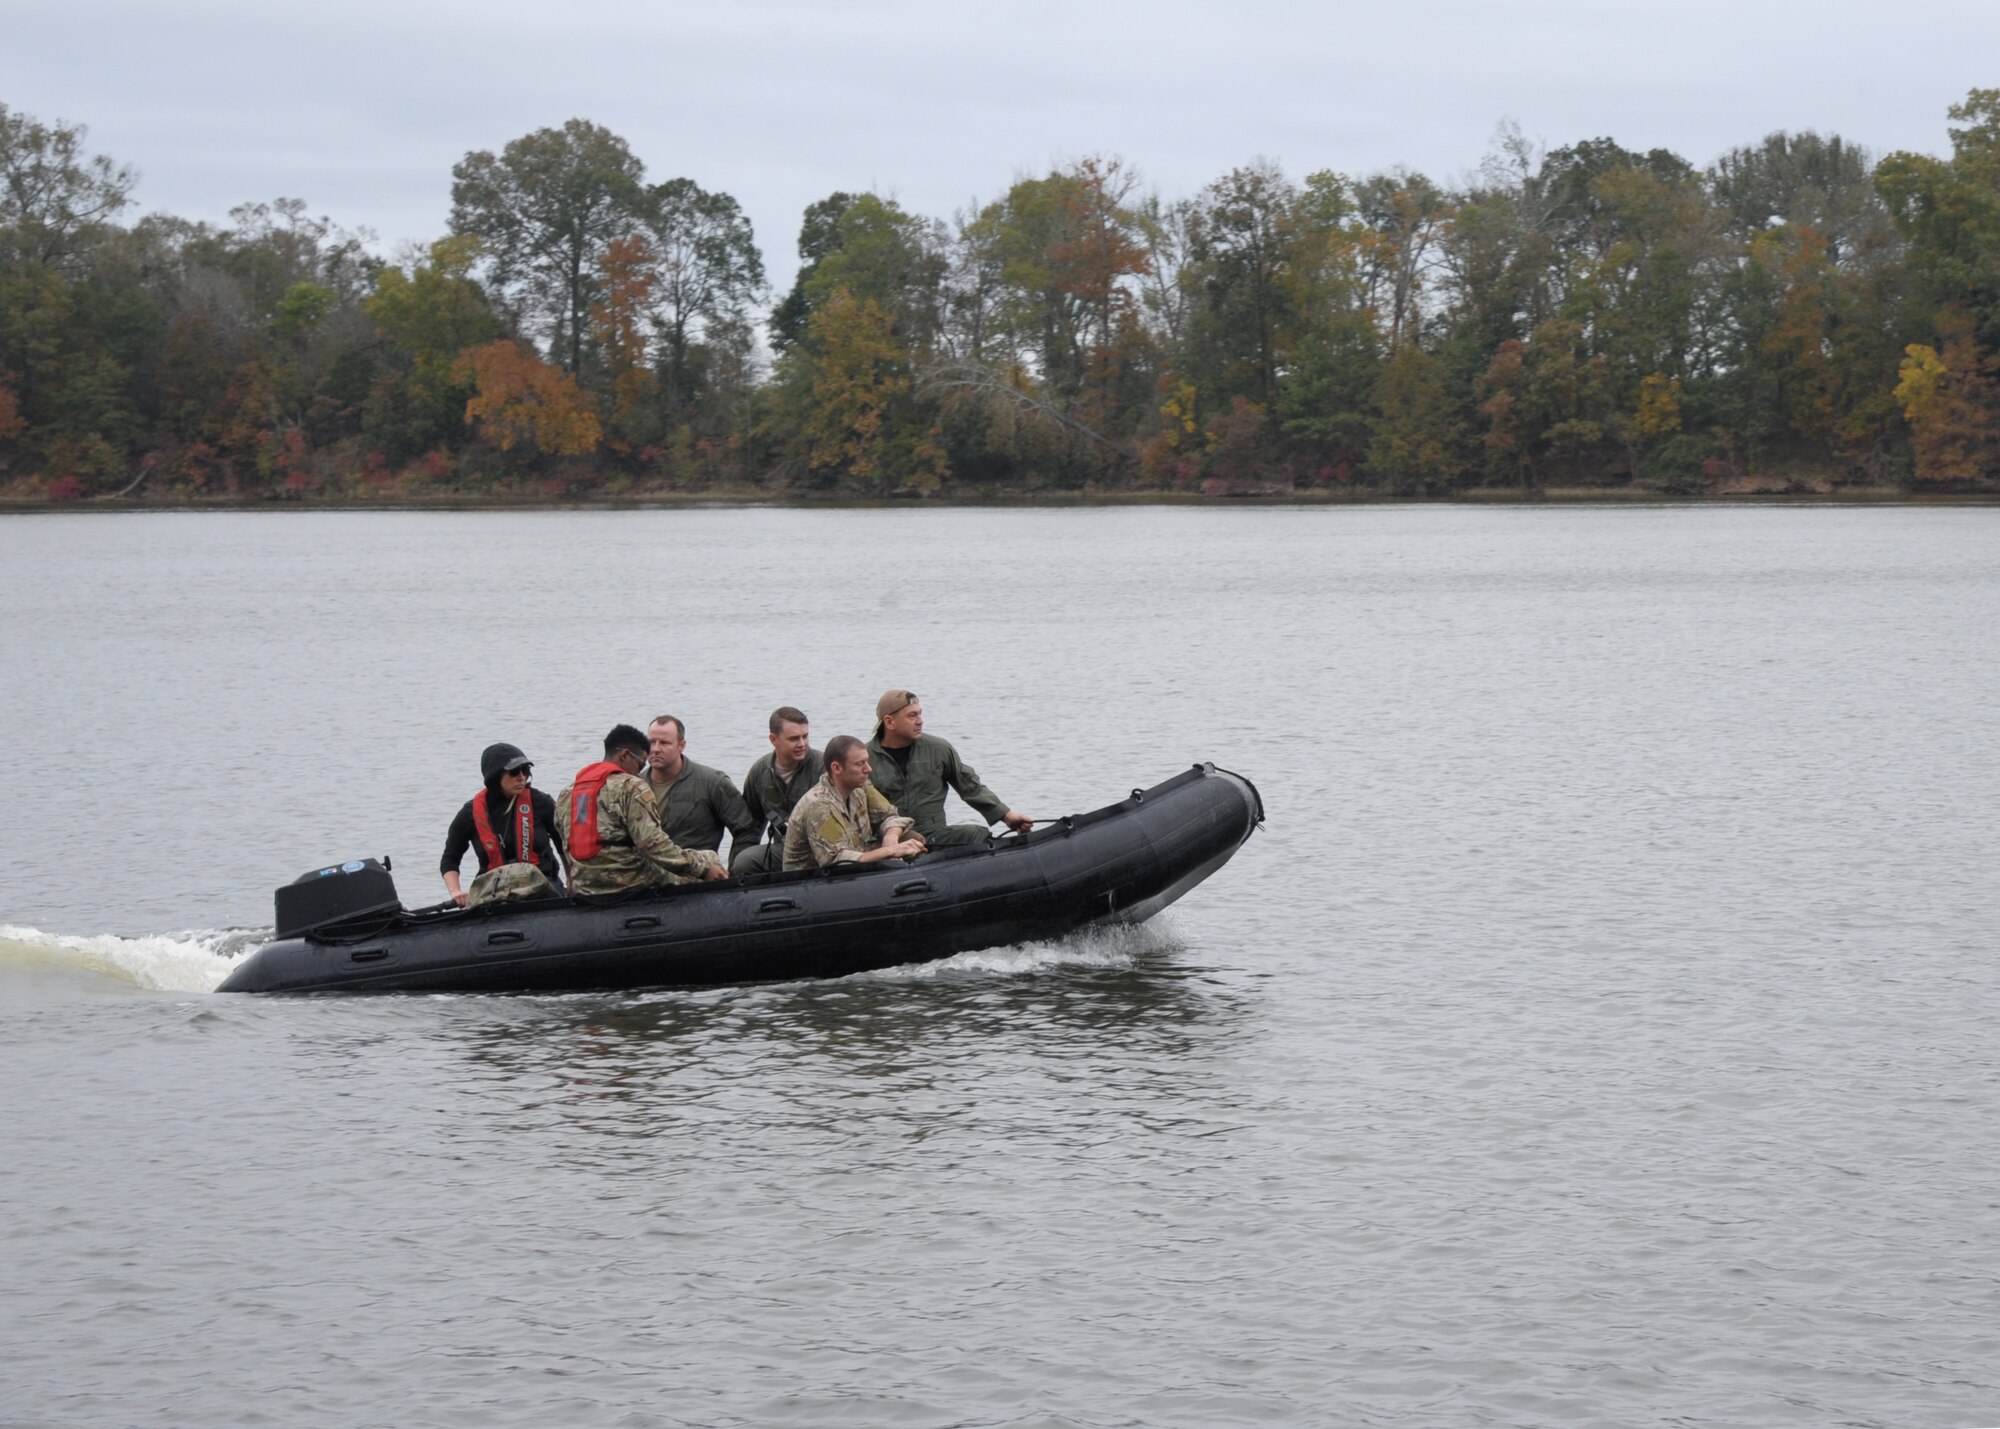 Members of the 908th Operations Group rides in a F470 Combat Rubber Raiding Craft after meeting at their designated extraction point Nov. 8, 2020, at Maxwell Air Force Base, Alabama.